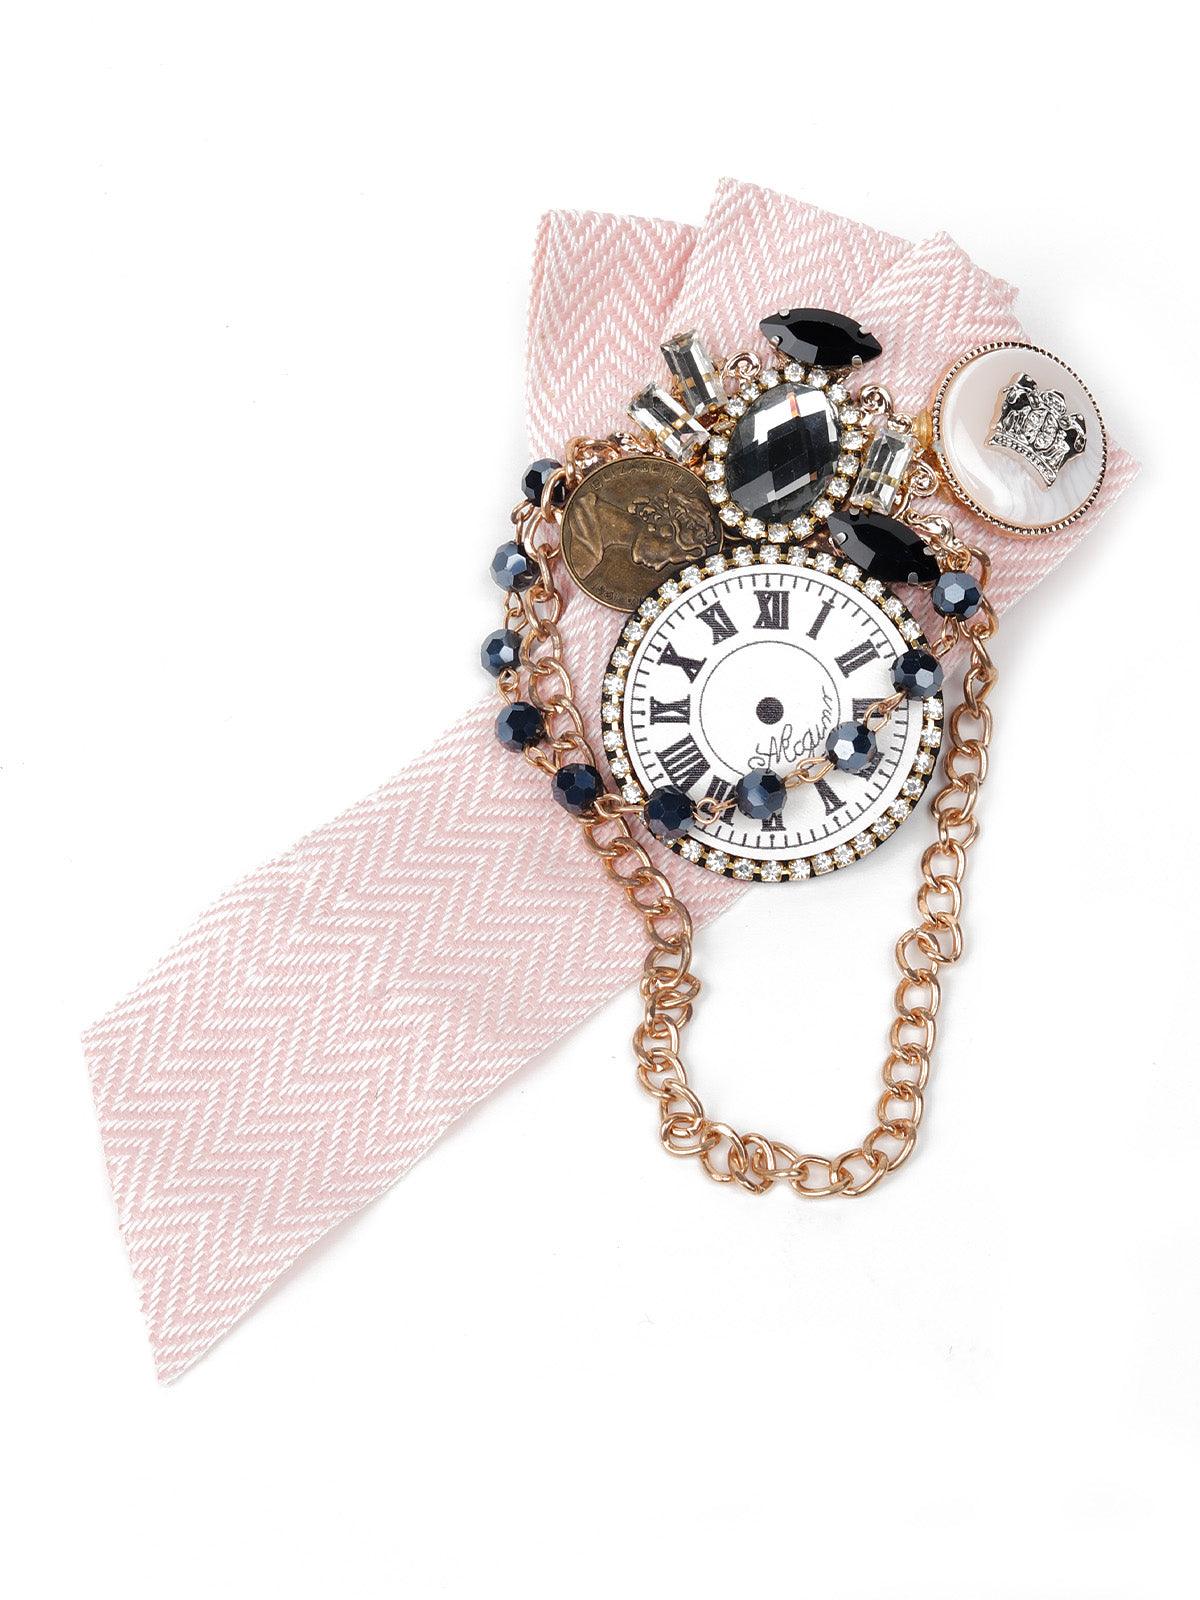 Pink antique clock themed brooch embellished with charms - Odette